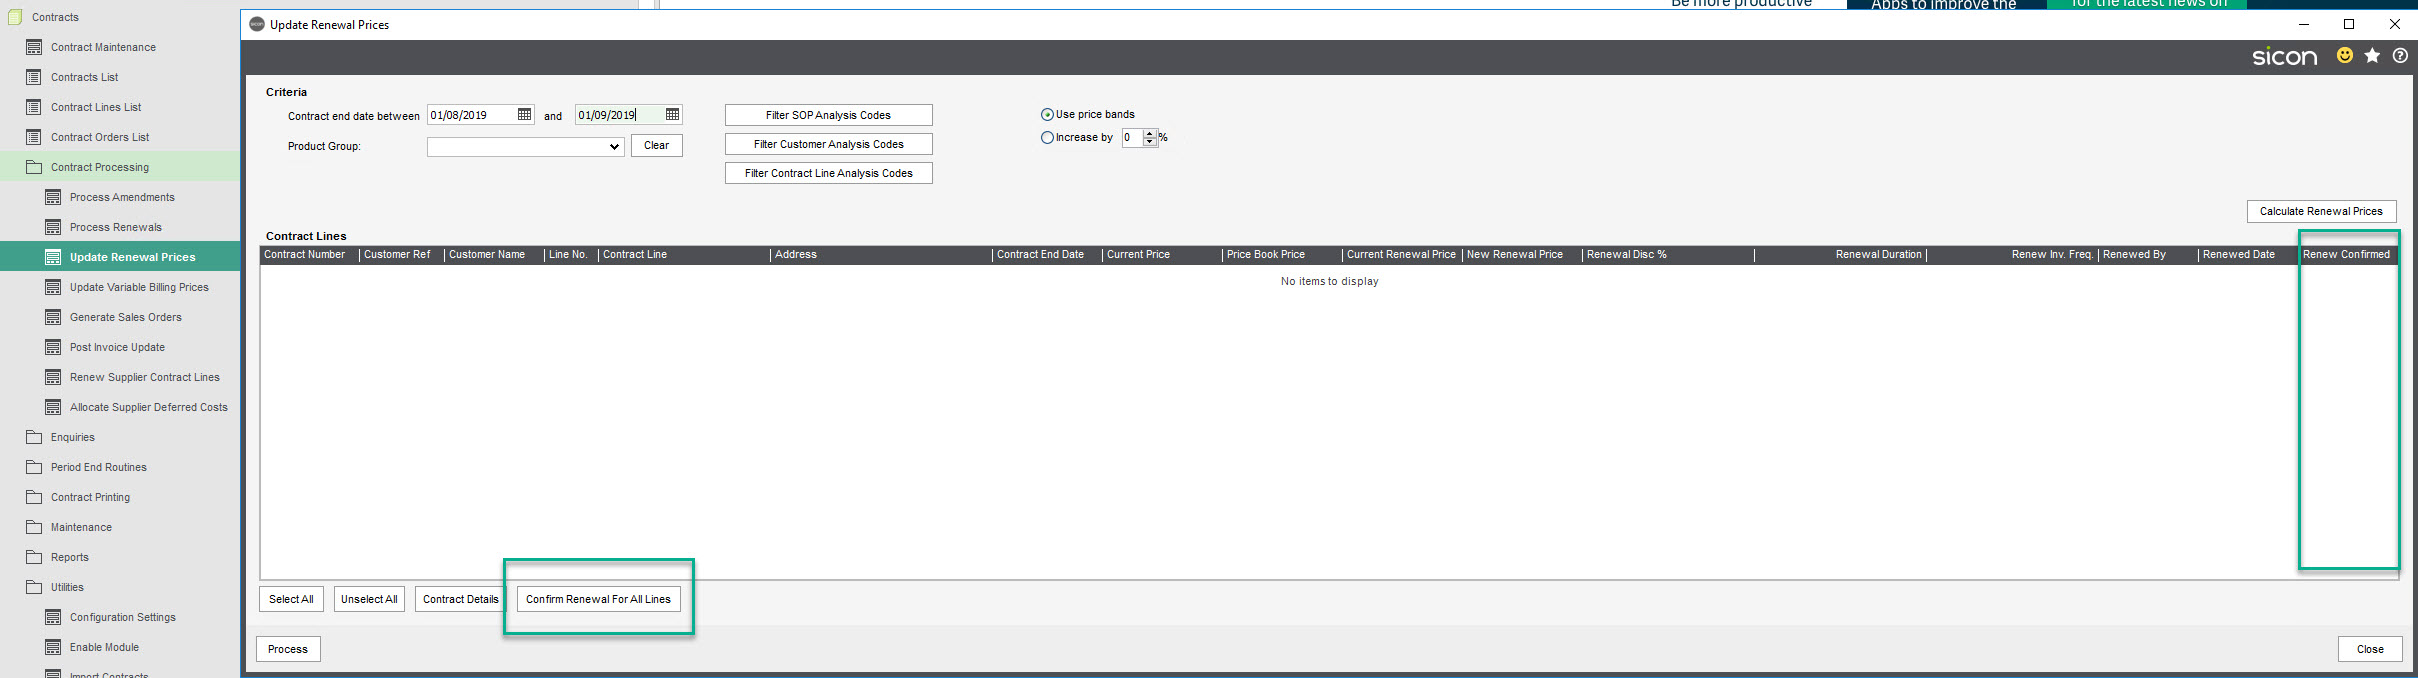 Sicon Contracts Help and User Guide - section 6.5 image 3 screen with feature ticked